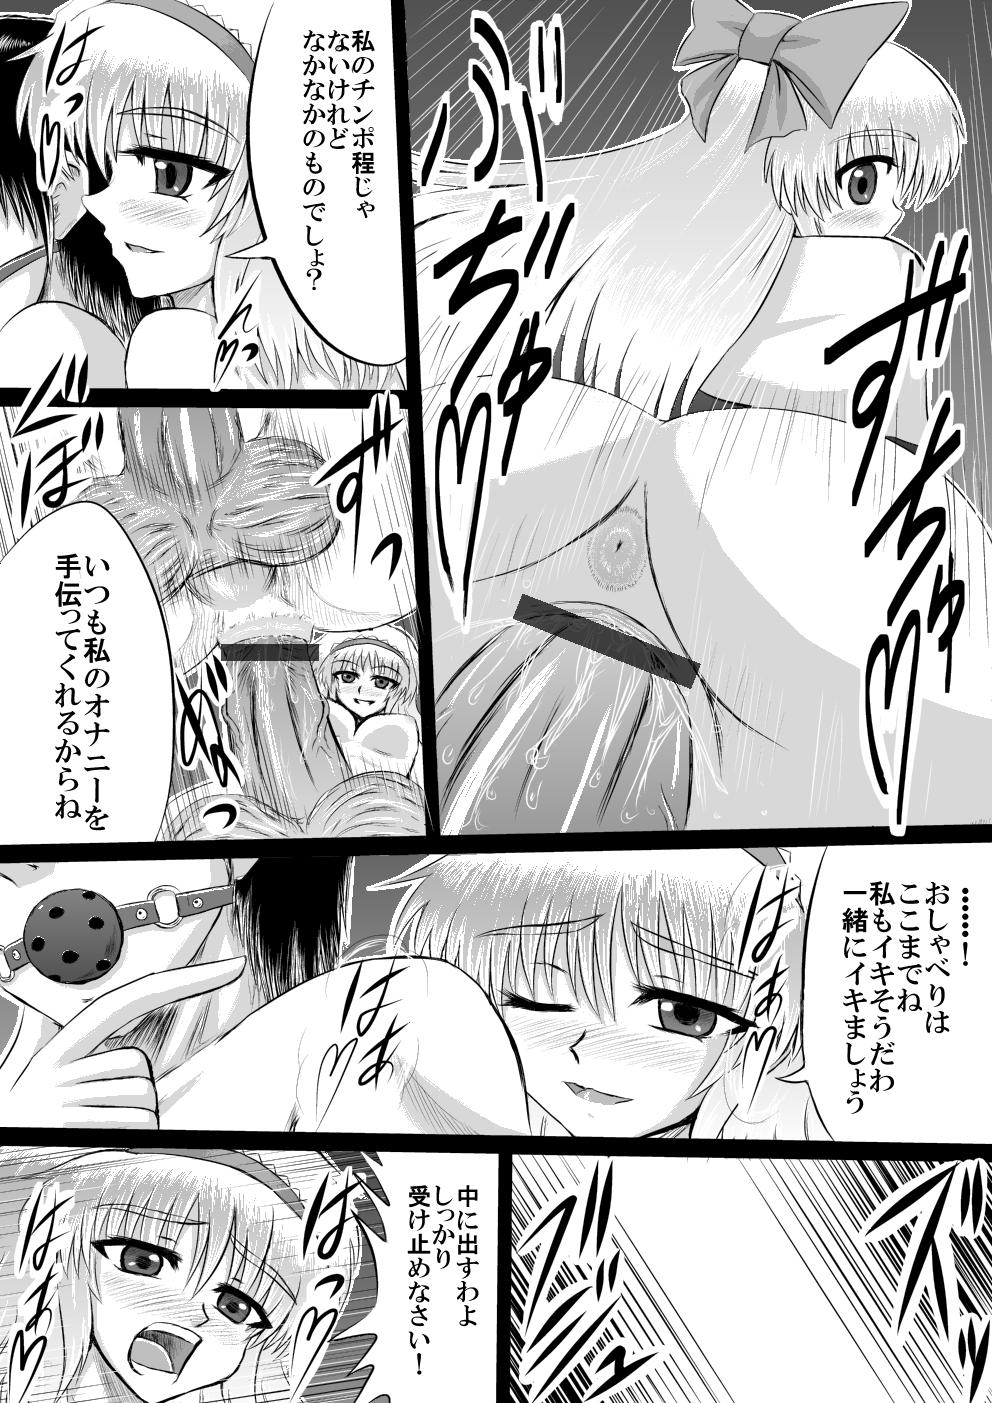 Model 大魔女アリス＝マーガトロイドの専属オナホ - Touhou project Sex Toy - Page 8